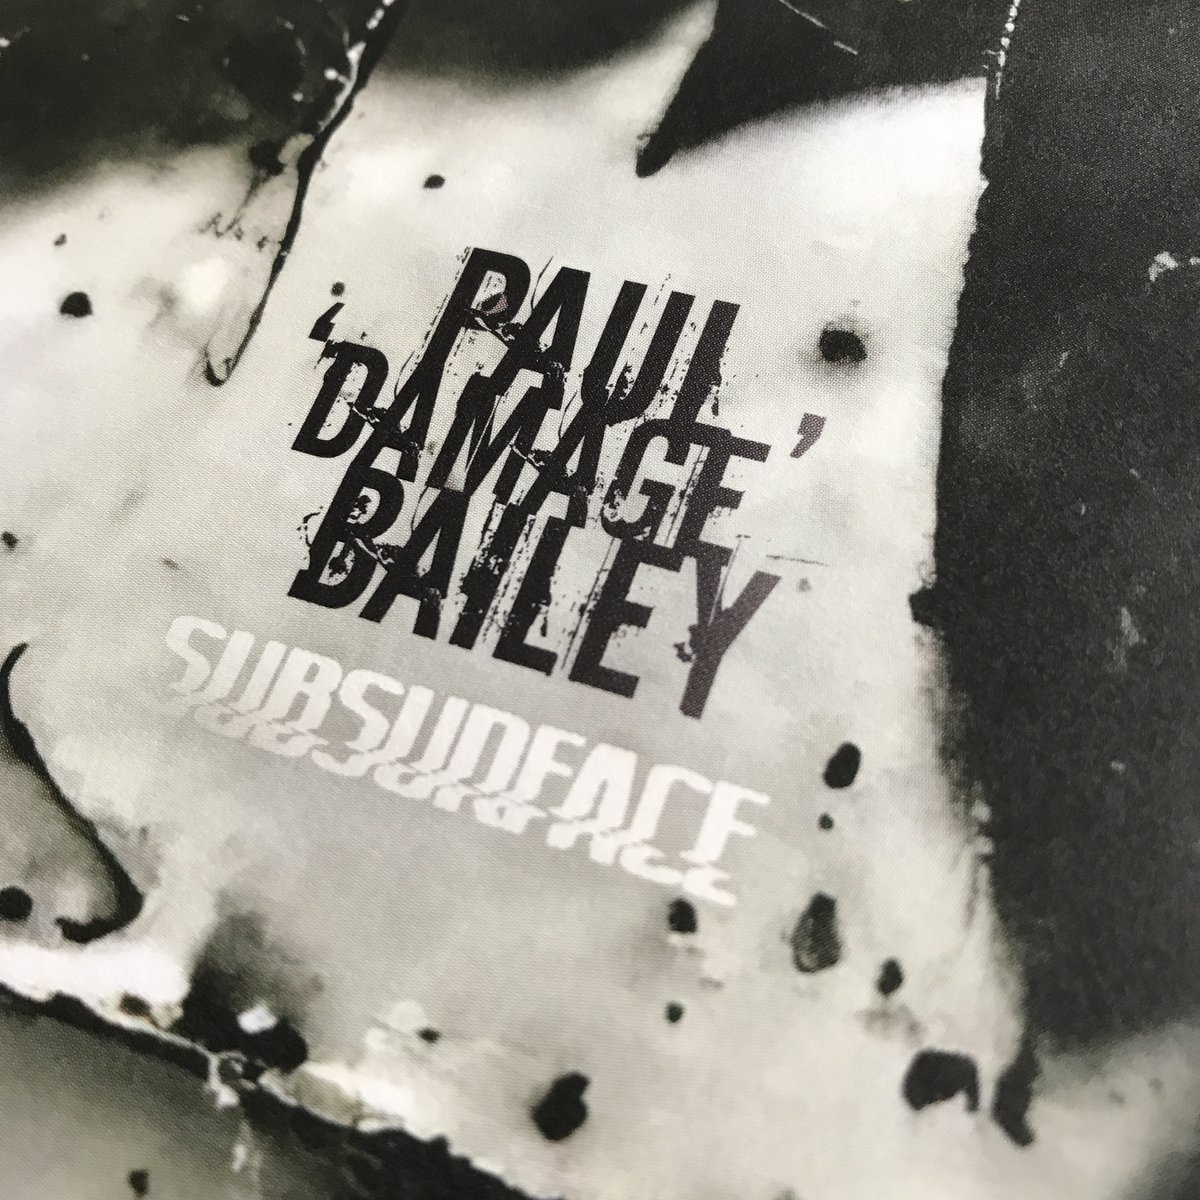 ‘Paul 'Damage' Bailey - Subsurface’ (incl. remixes by @James_Ruskin & Makaton) is out now! Bandcamp: bit.ly/3IekJfW @Paul_Bailey1881, one of the original resident DJs at Birmingham's HOG club nights along with @Tony_Surgeon and Sir Real, strikes back on De:tuned.